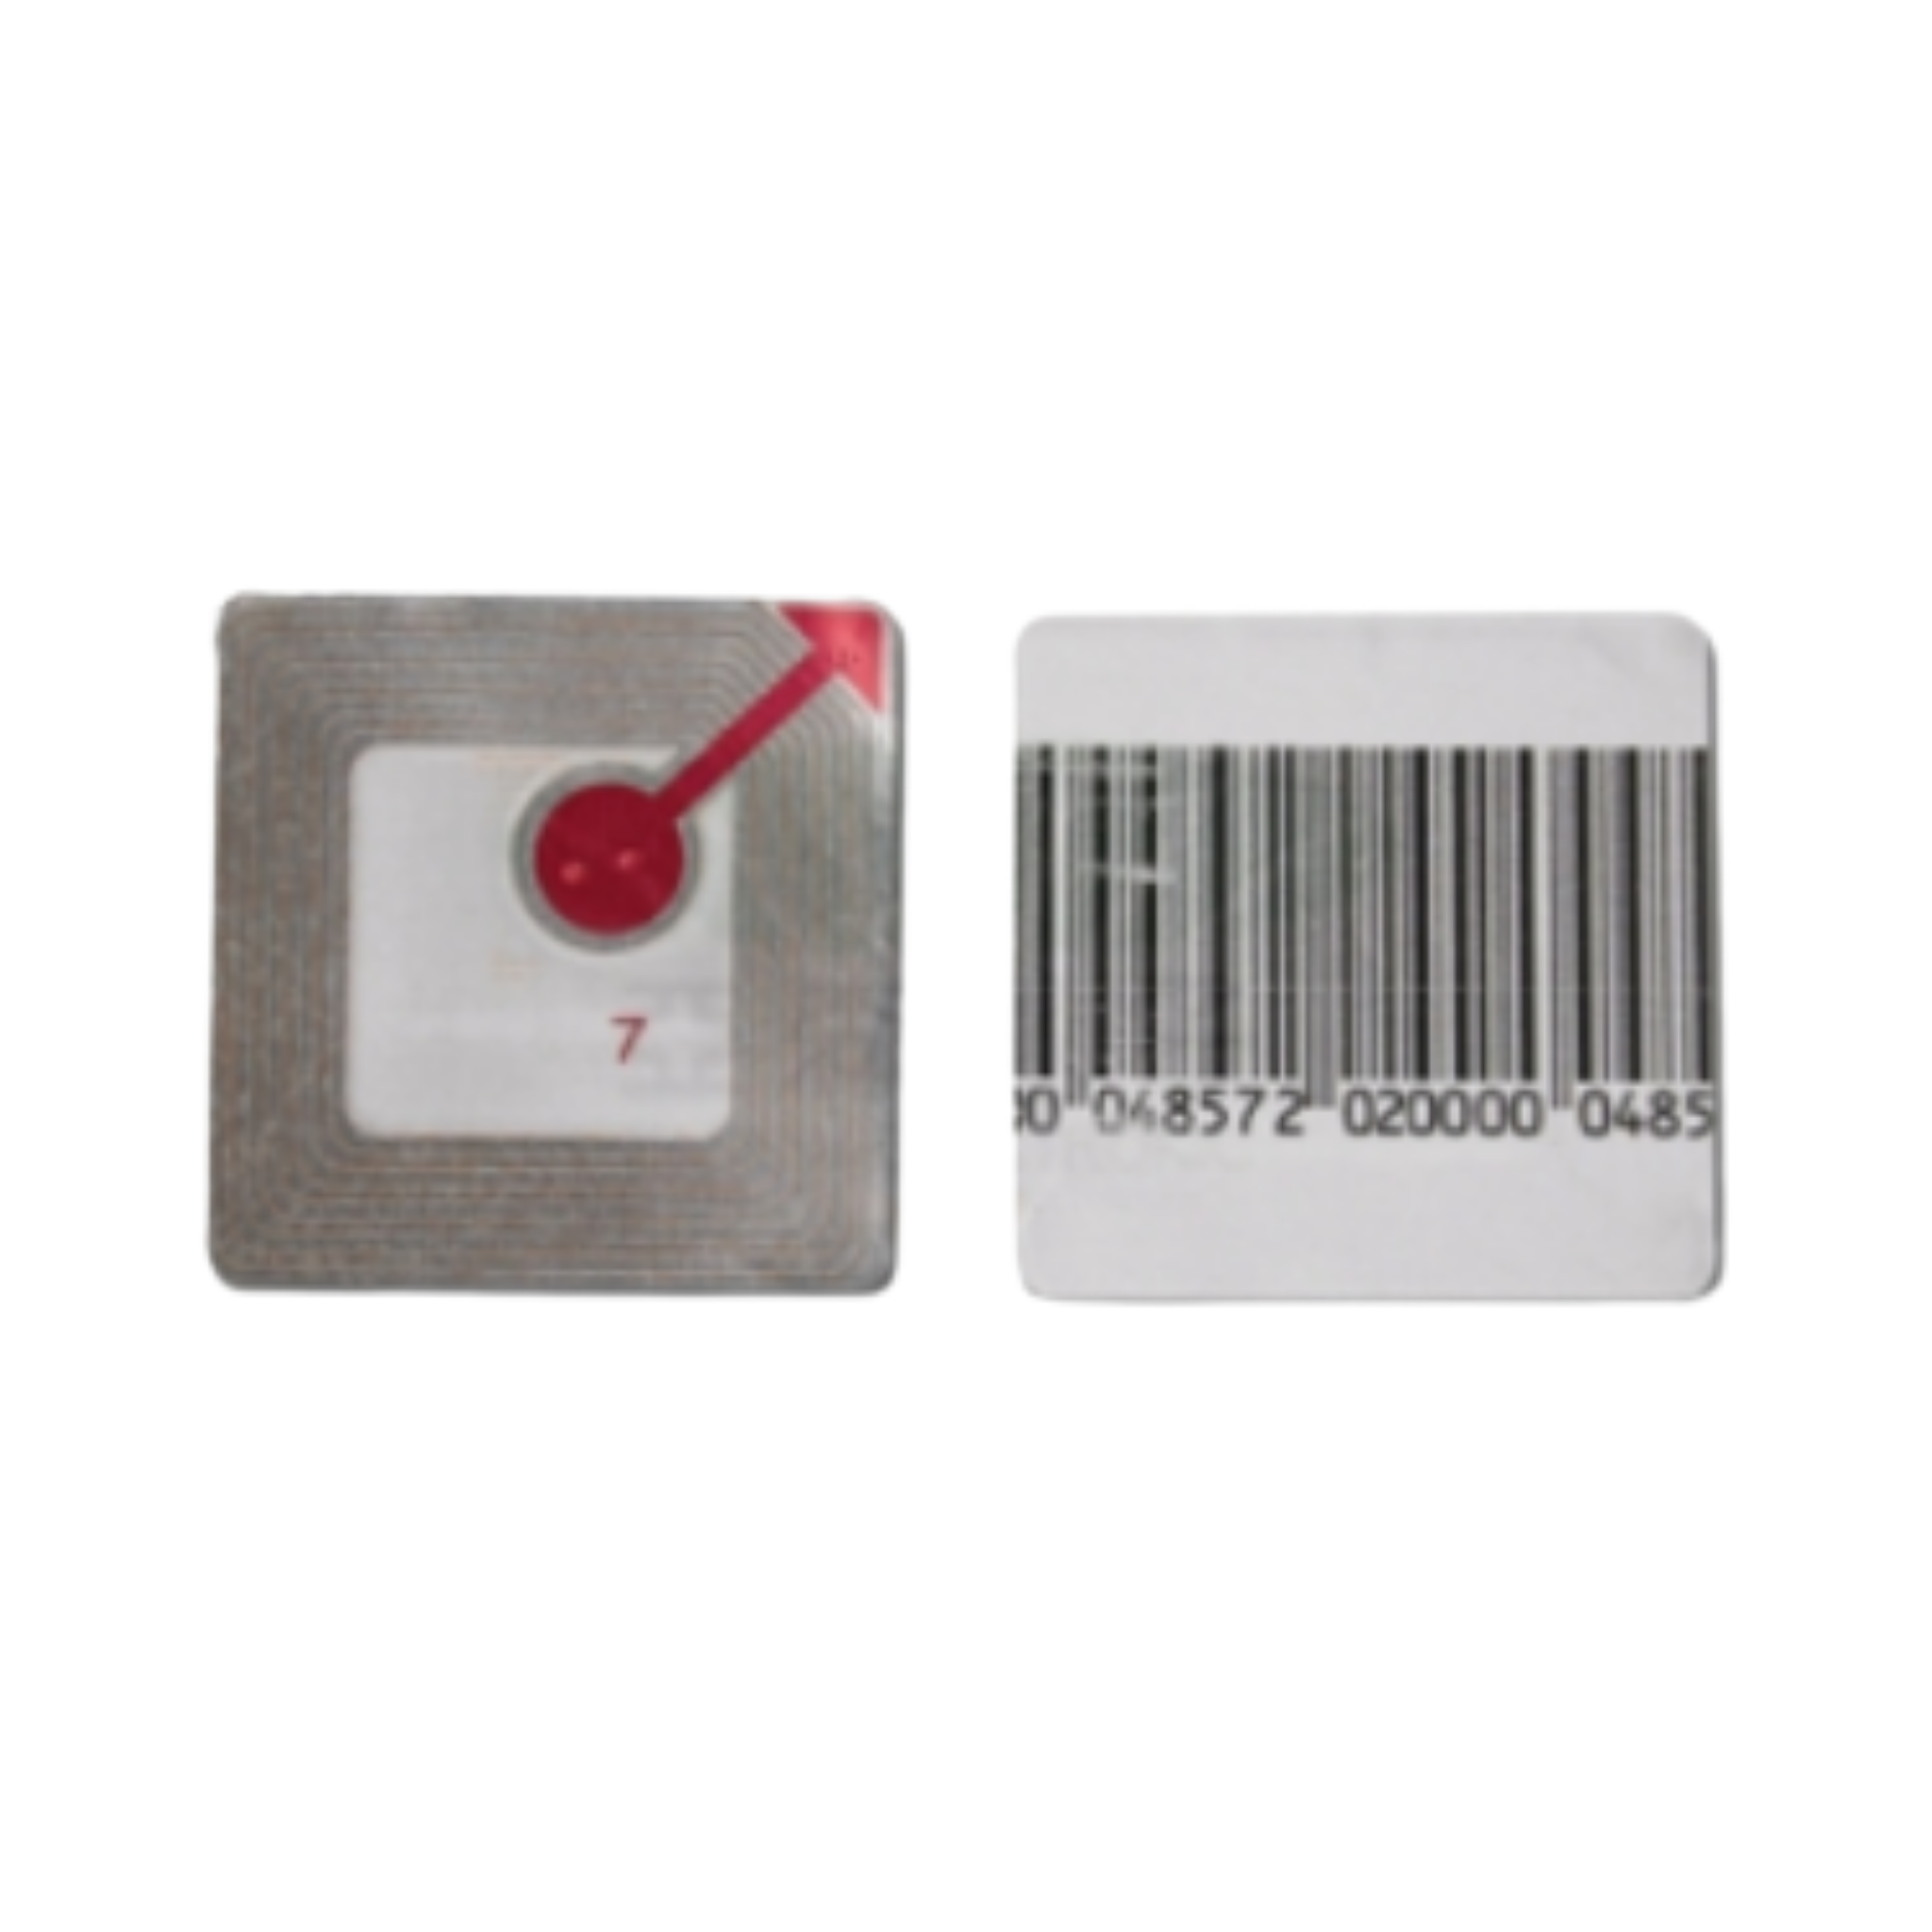 RF Labels 4x4 and 5x5 - Roll of 20,000 - TagShopUK